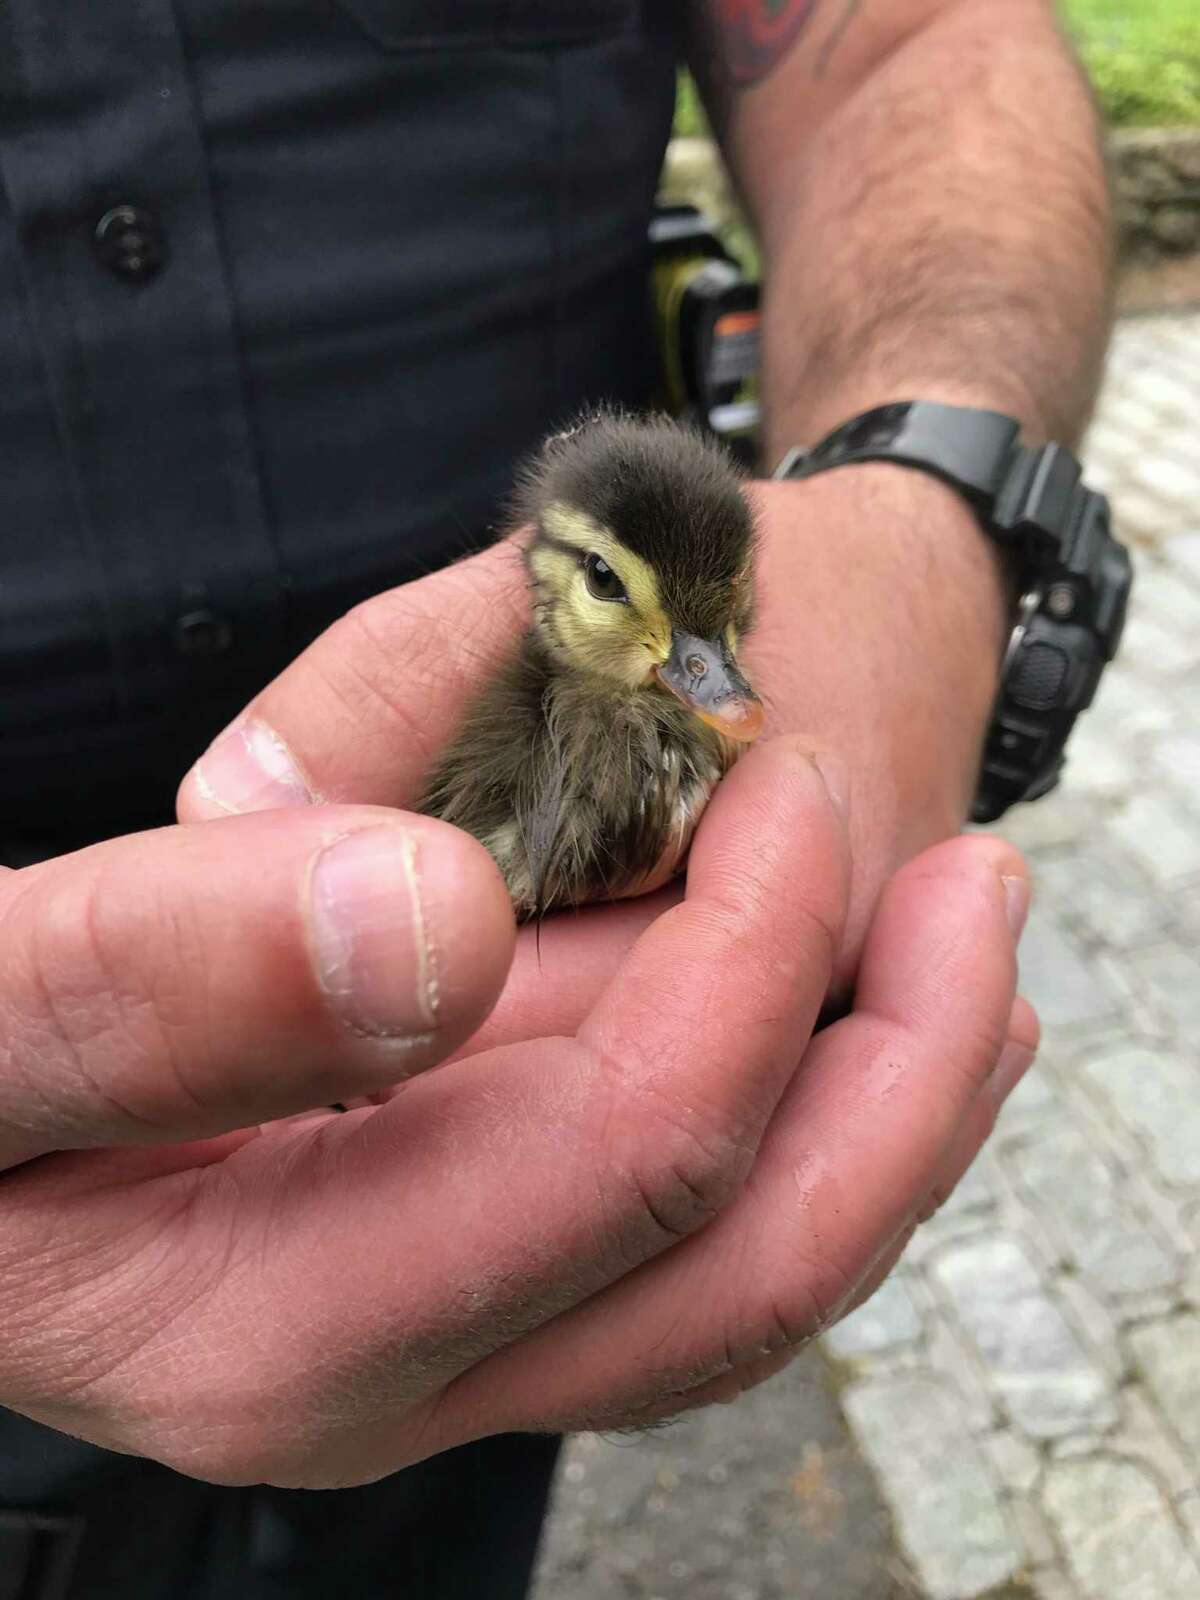 On Monday, May 18, two baby Wood Ducks were rescued out of a drain grating on Mamanasco Road by the Ridgefield Police and Animal Control.